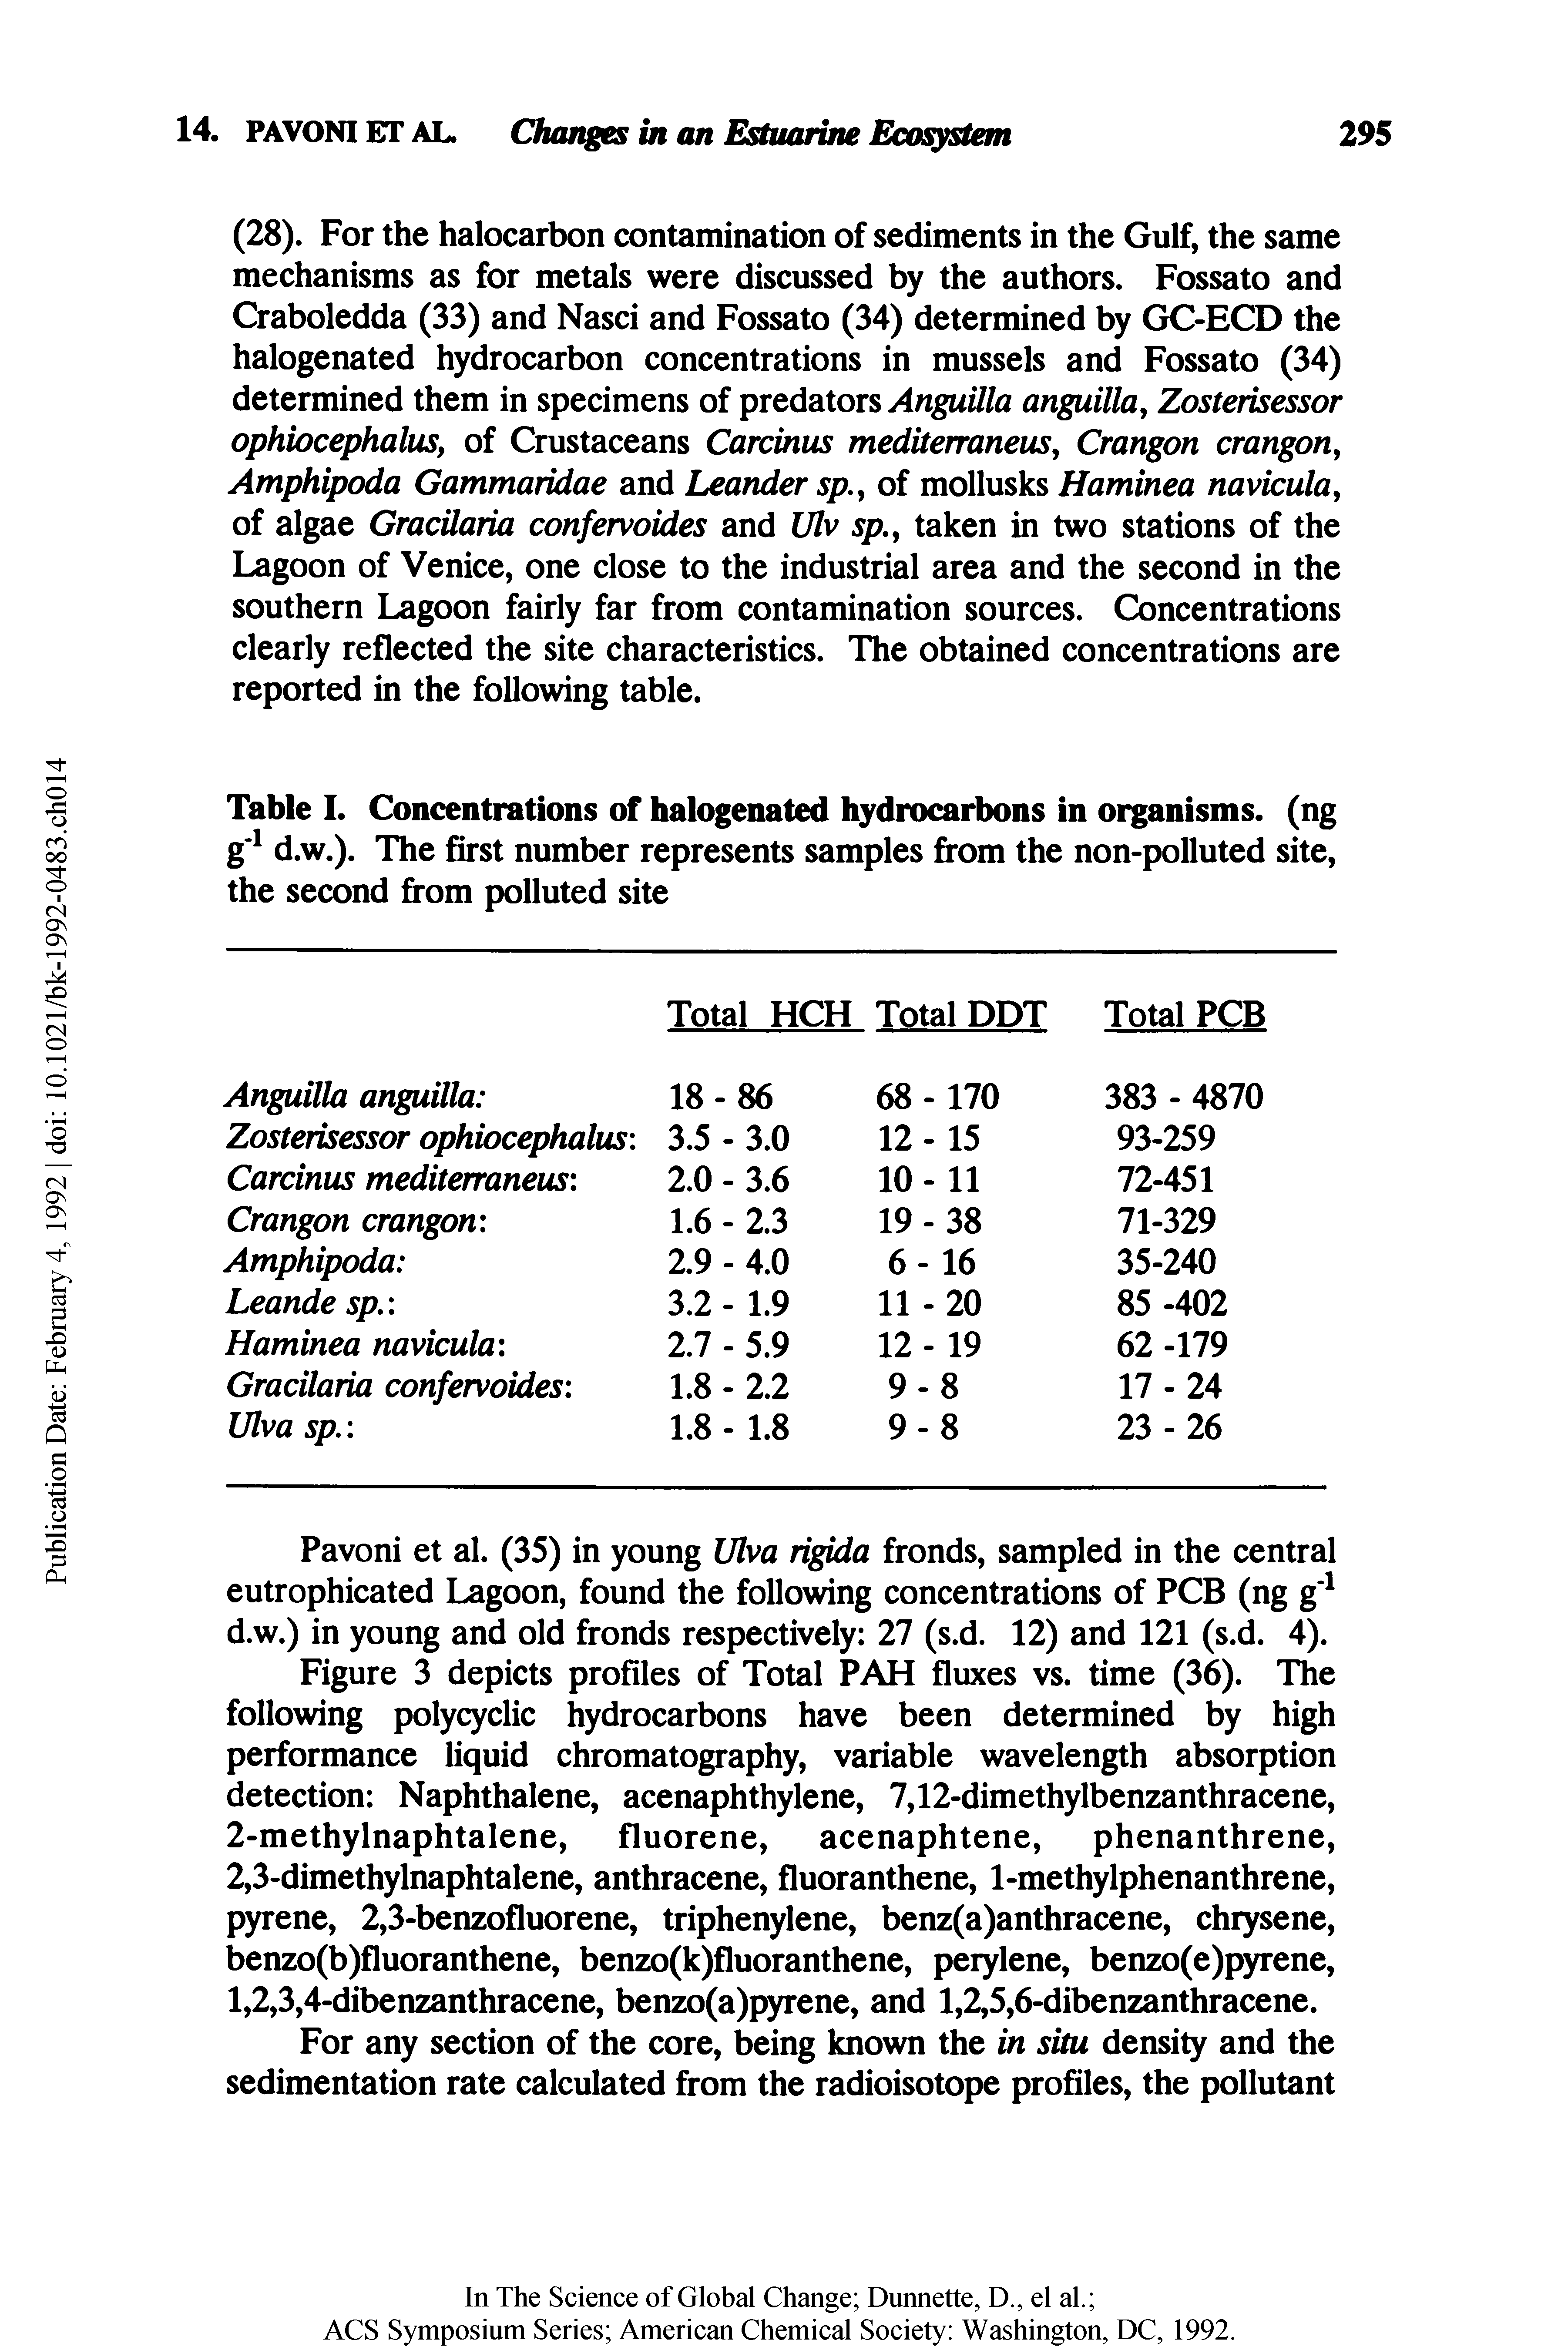 Table I. Concentrations of halogenated hydrocarbons in organisms, (ng d.w.). The first number represents samples from the non-poUuted site, the second from polluted site...